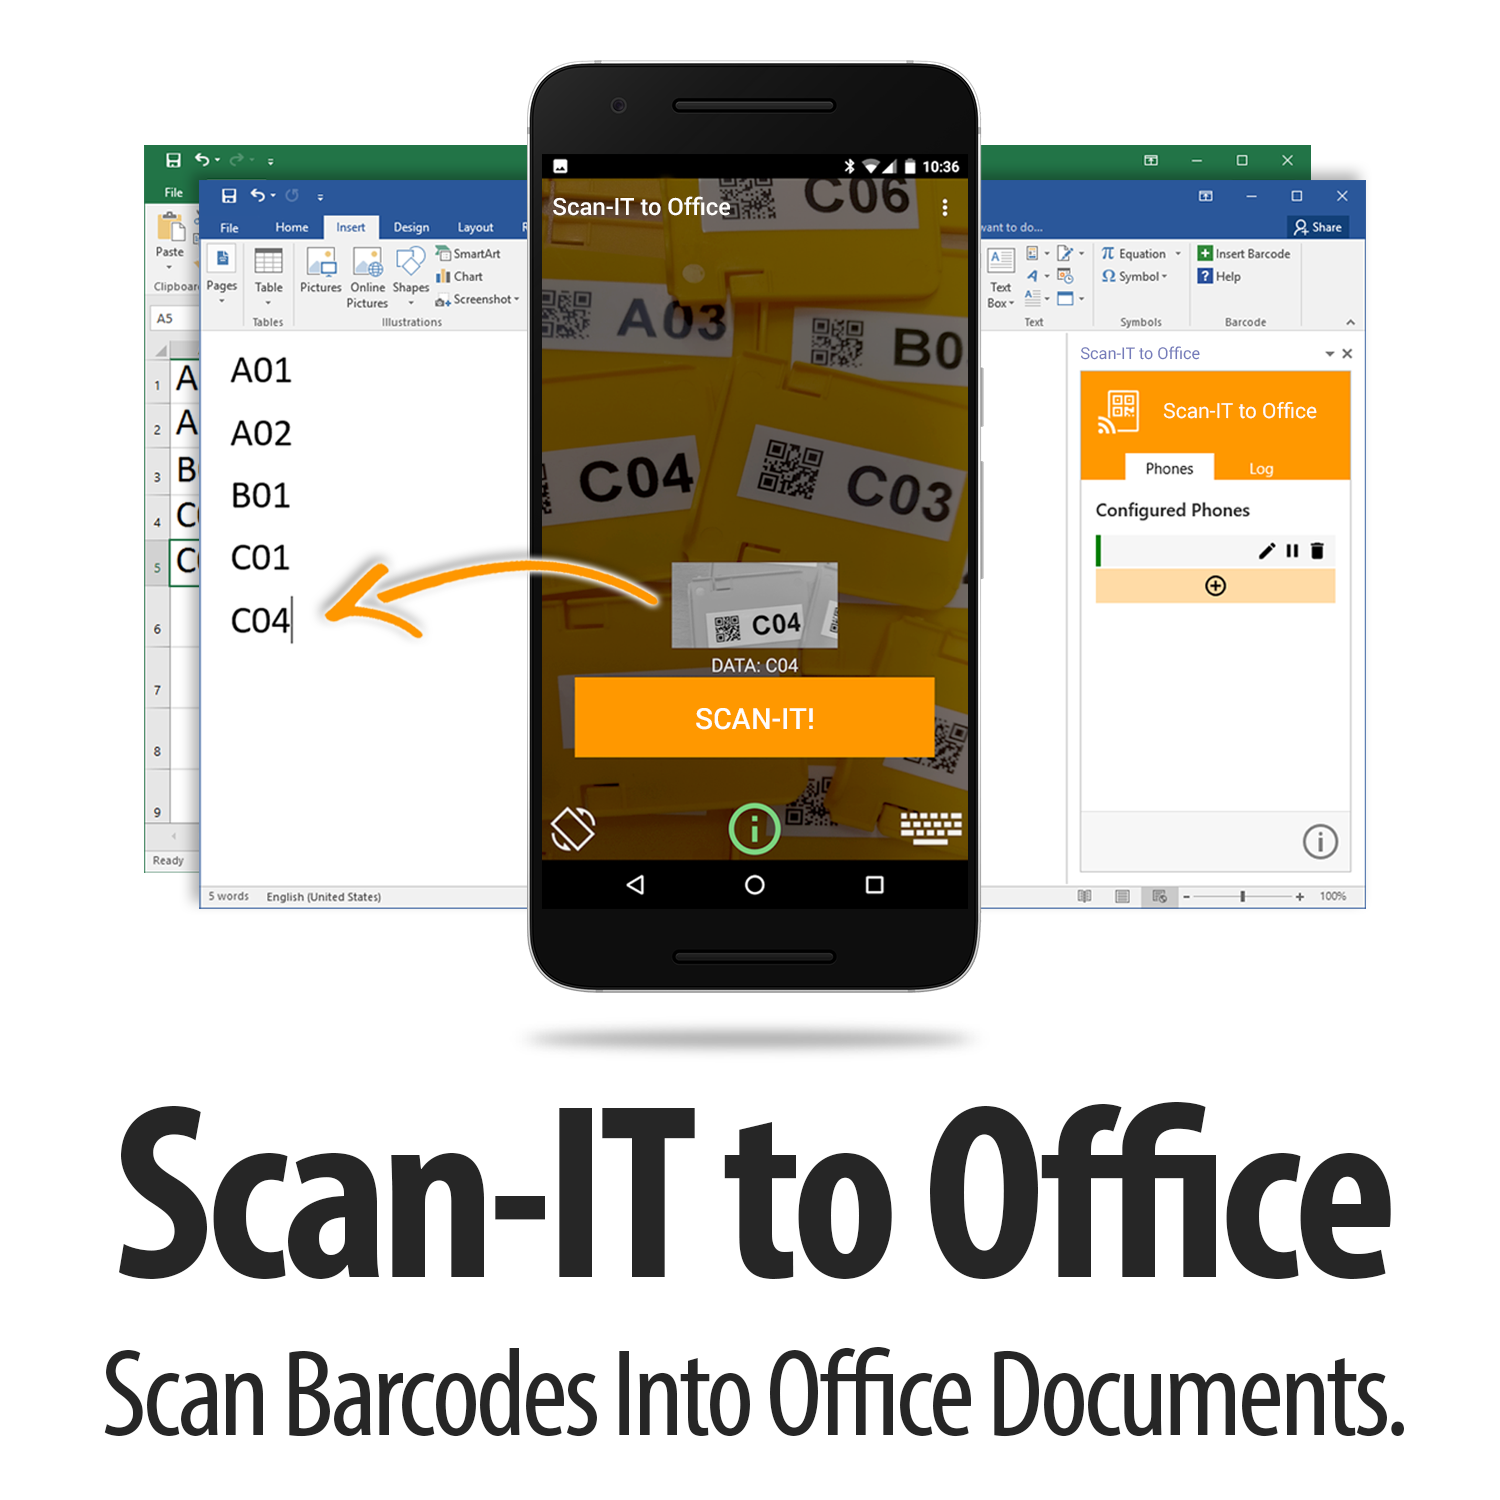 Scan-IT to Office: New App Scans Into Microsoft Office